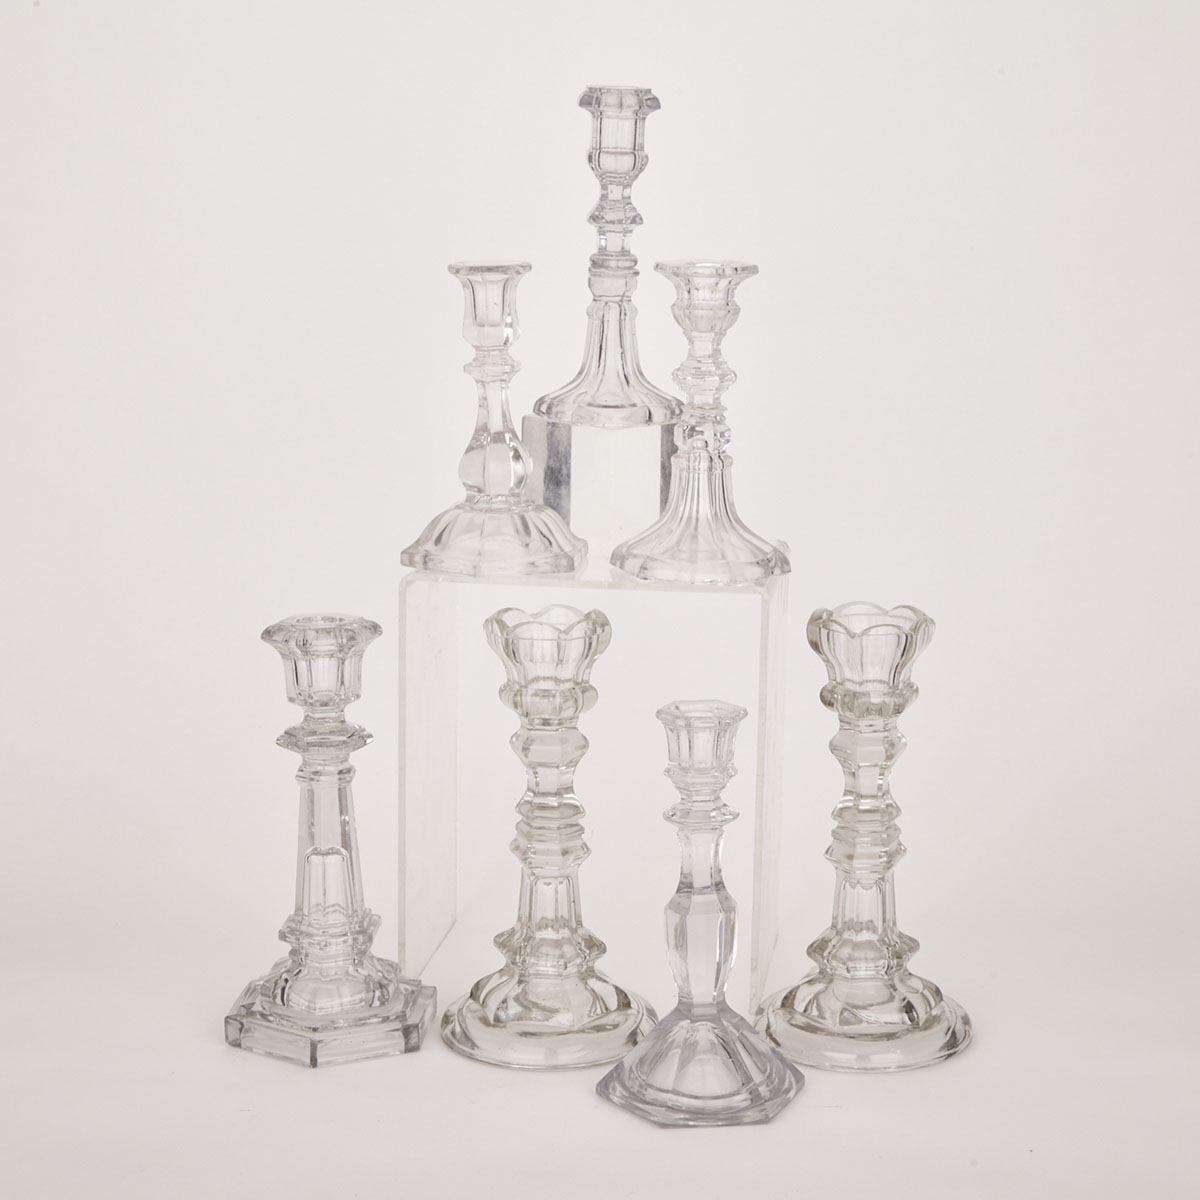 Collection of Seven American Pressed Clear Glass Candlesticks, 19th century